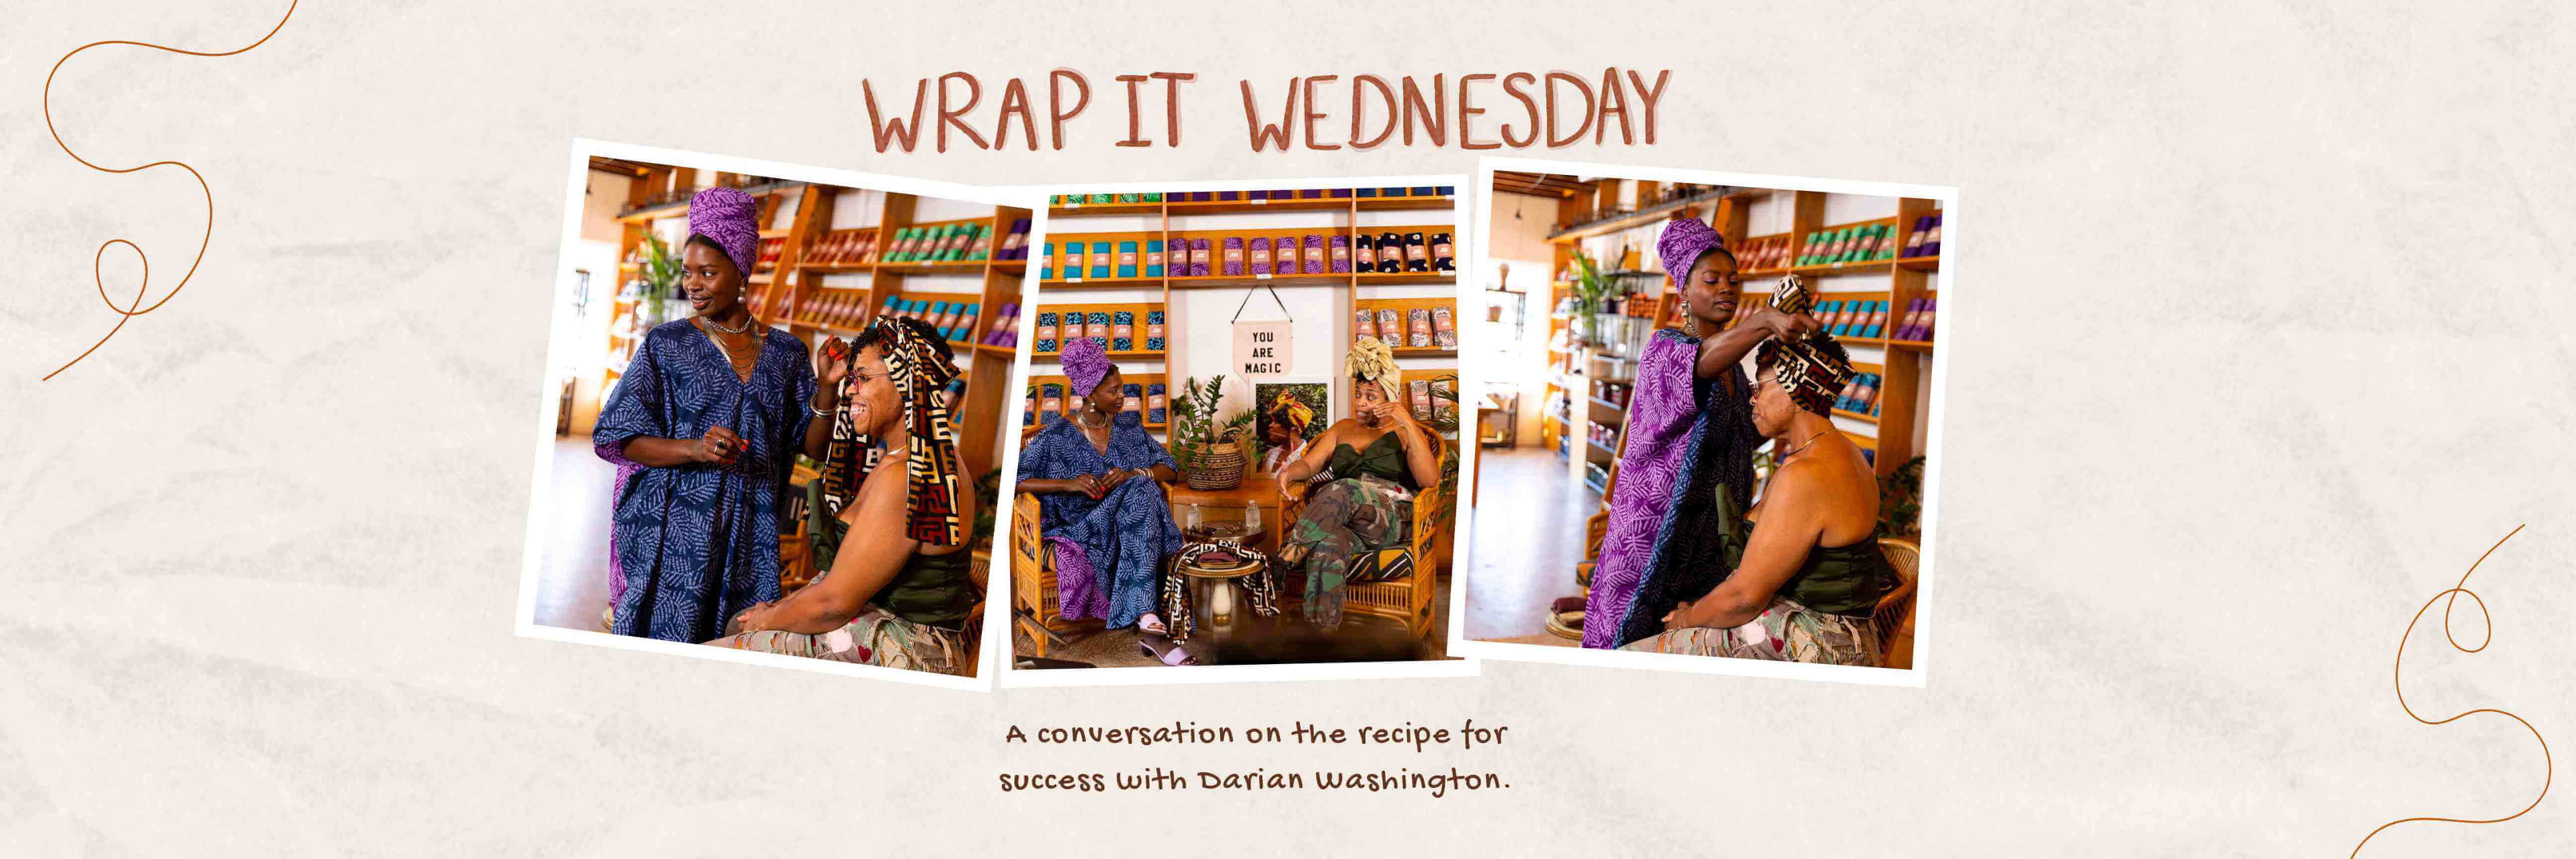 Wrap it Wednesday: A conversation on the recipe for success with Darian Washington.